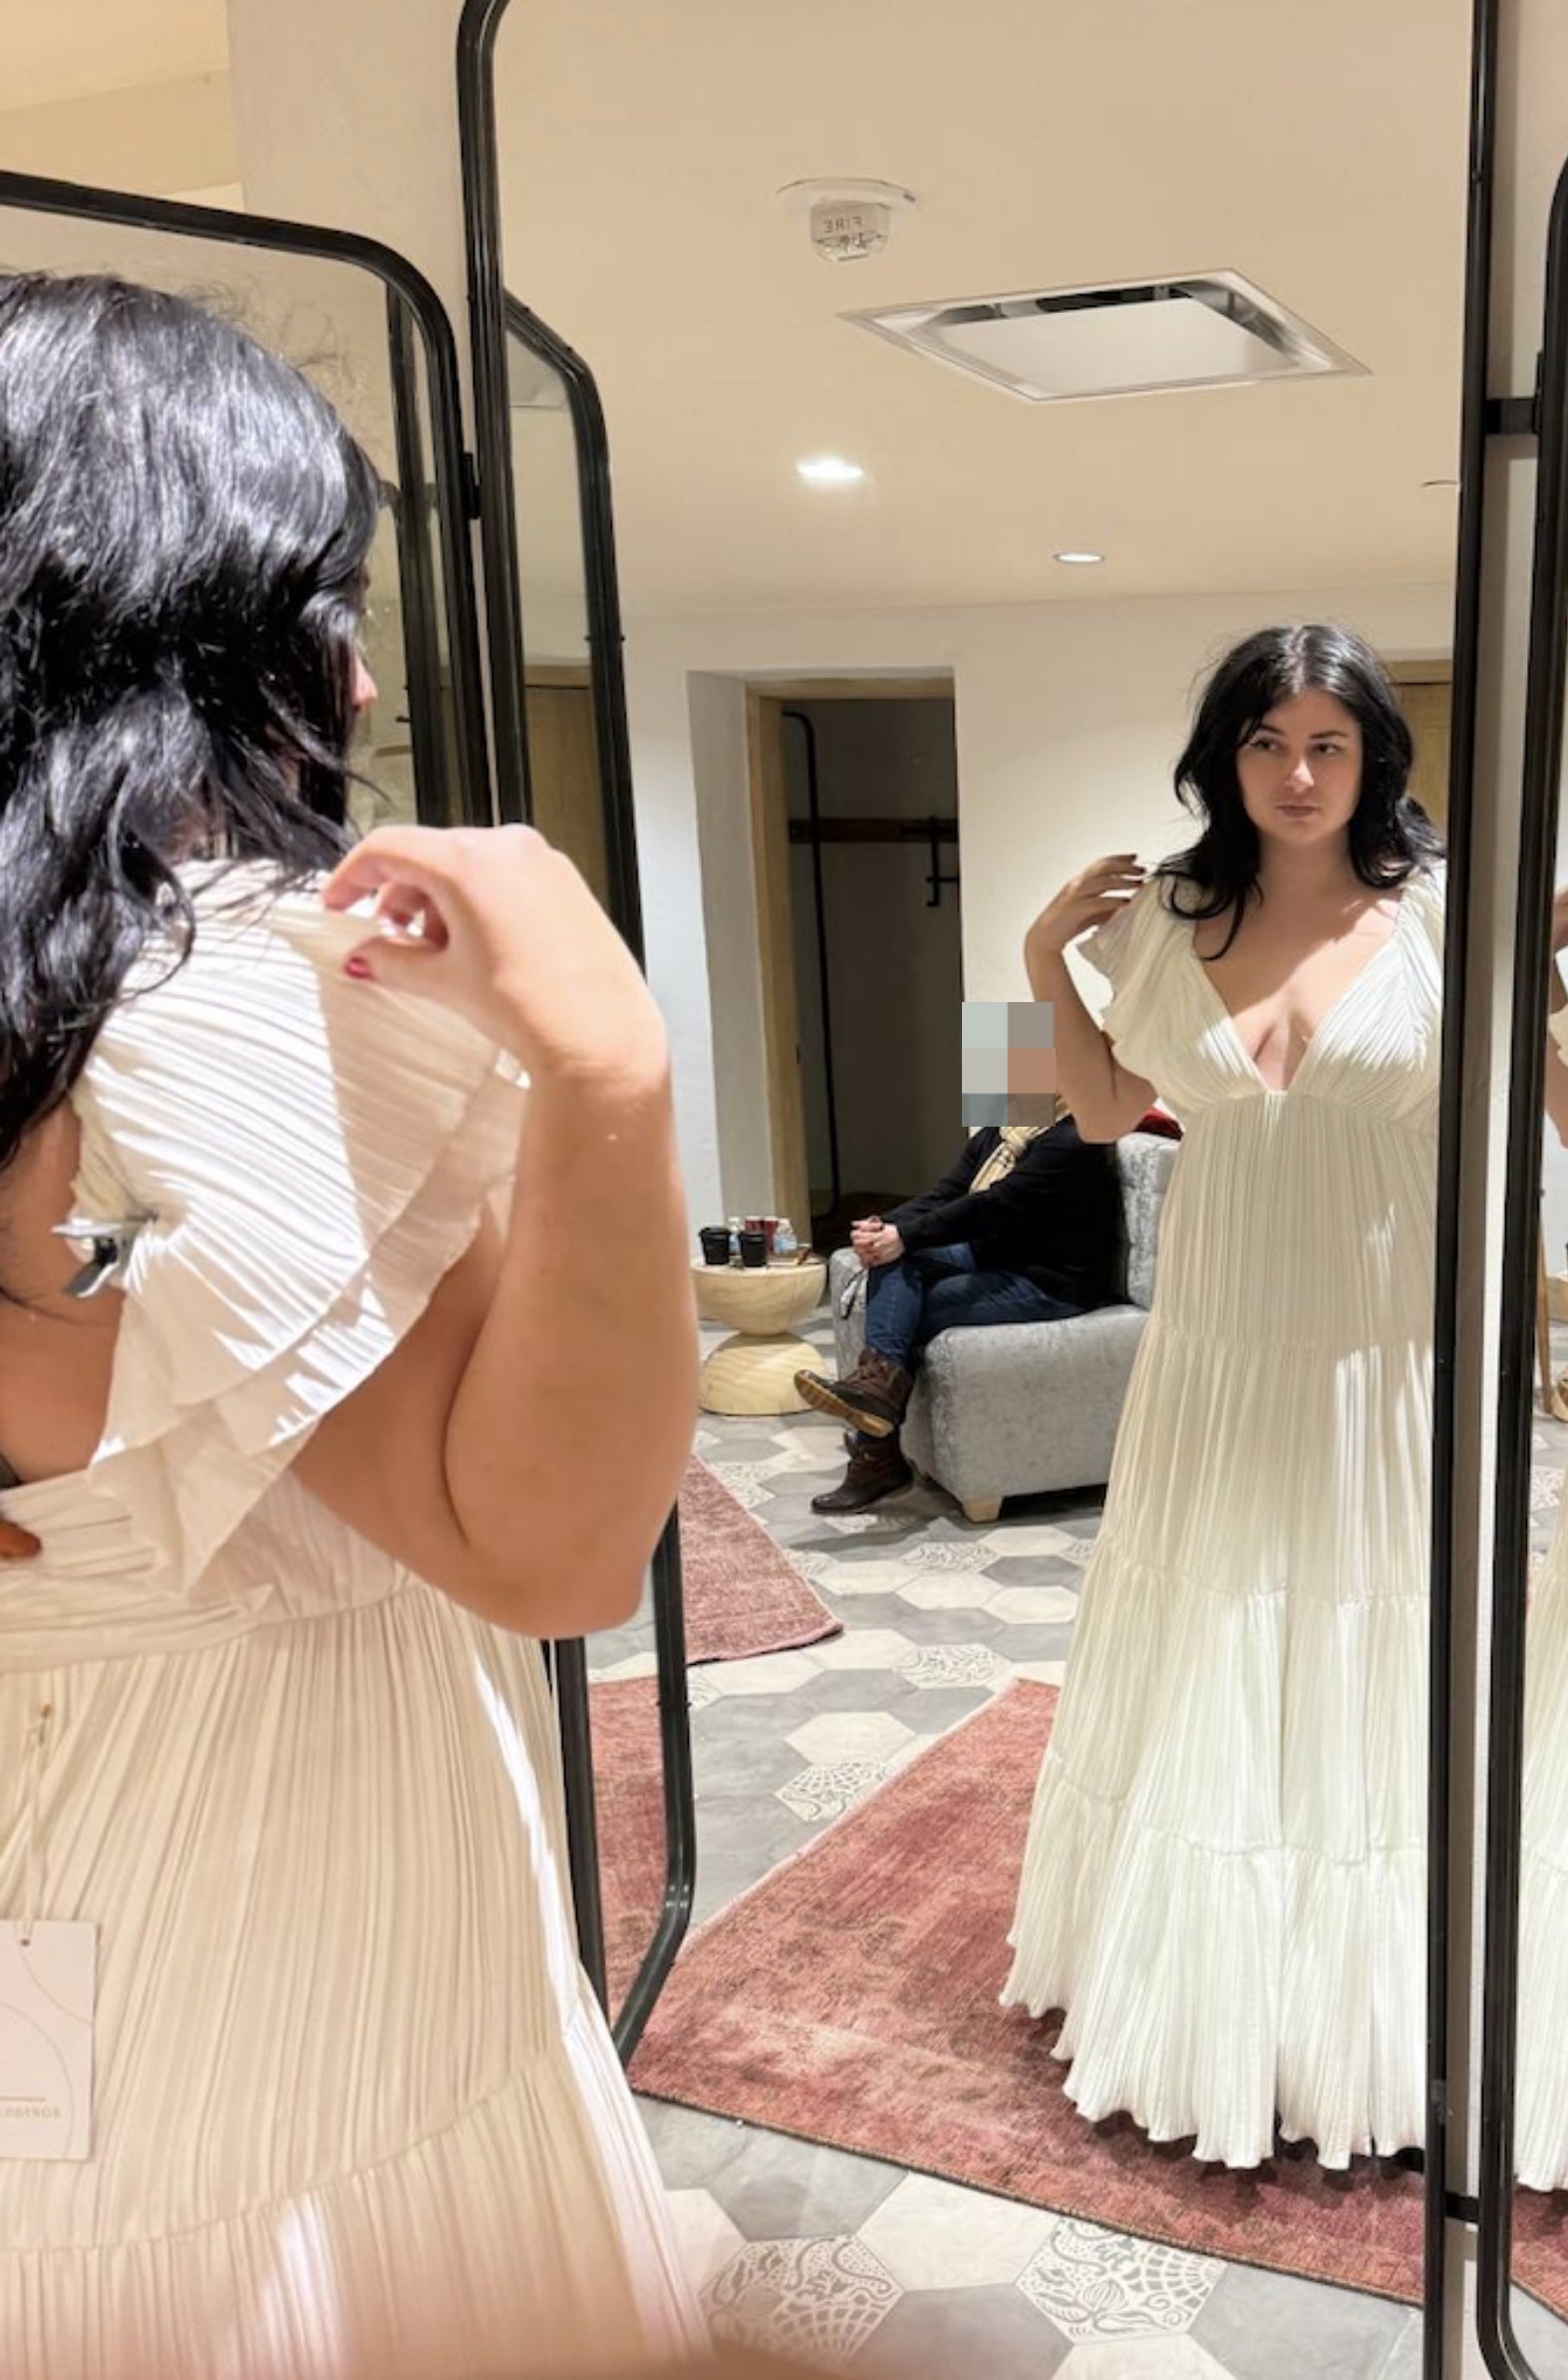 A person tries on a pleated dress in a mirror, another person seated in background